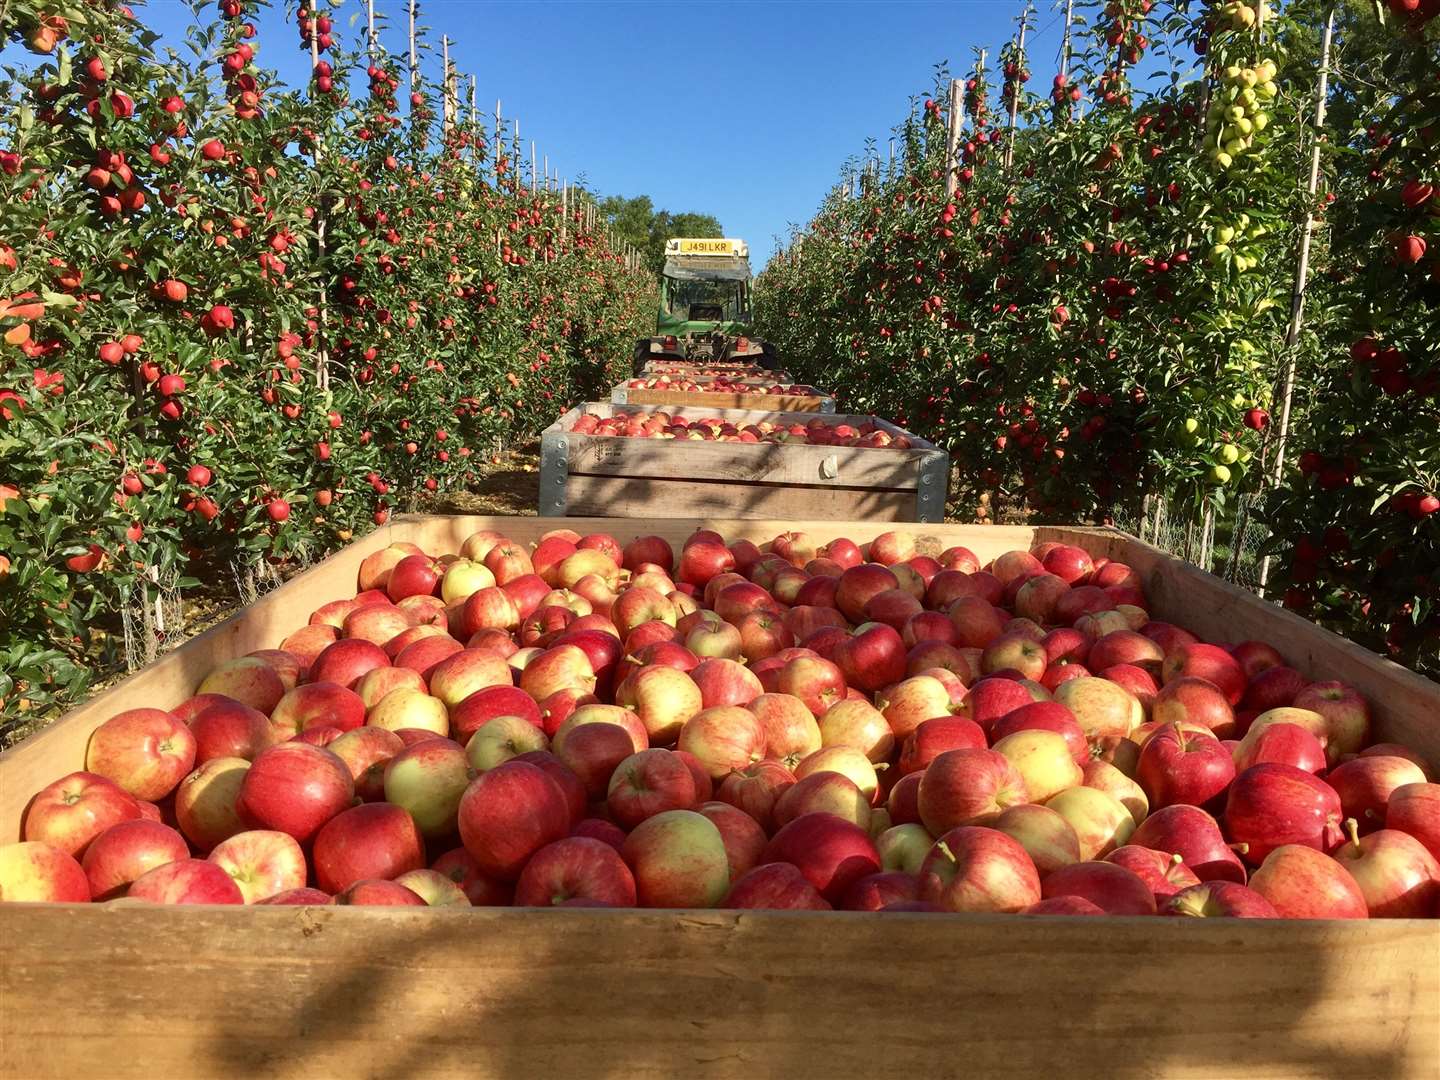 AC Goatham has 25 farms across Kent and grows 350 million apples and 55 million pears each year